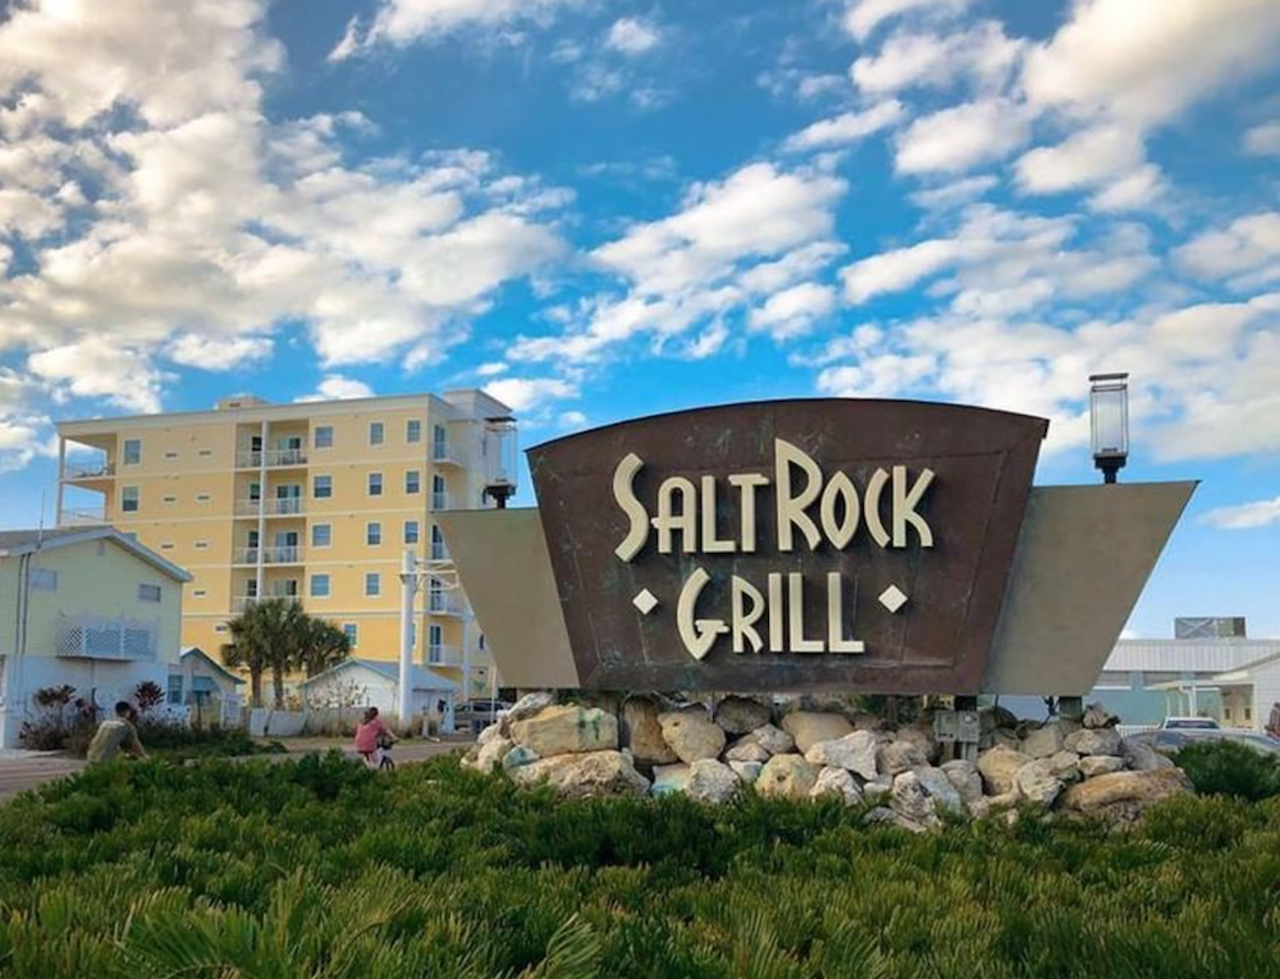 Salt Rock Grill  
19325 Gulf Blvd., Indian Shores, 727-593-7625
Whether you’re taking a beach drive down Indian Shores or cruising along the intercoastal waterway, you’ll want to treat yourself by booking a reservation at Salt Rock Grill. This classy waterside restaurant serves fresh-caught Florida fish like mahi-mahi, black grouper and red snapper every day, as well as some of the finest steaks and signature cuisine along the coast.  
Photo via Salt Rock Grill/Instagram